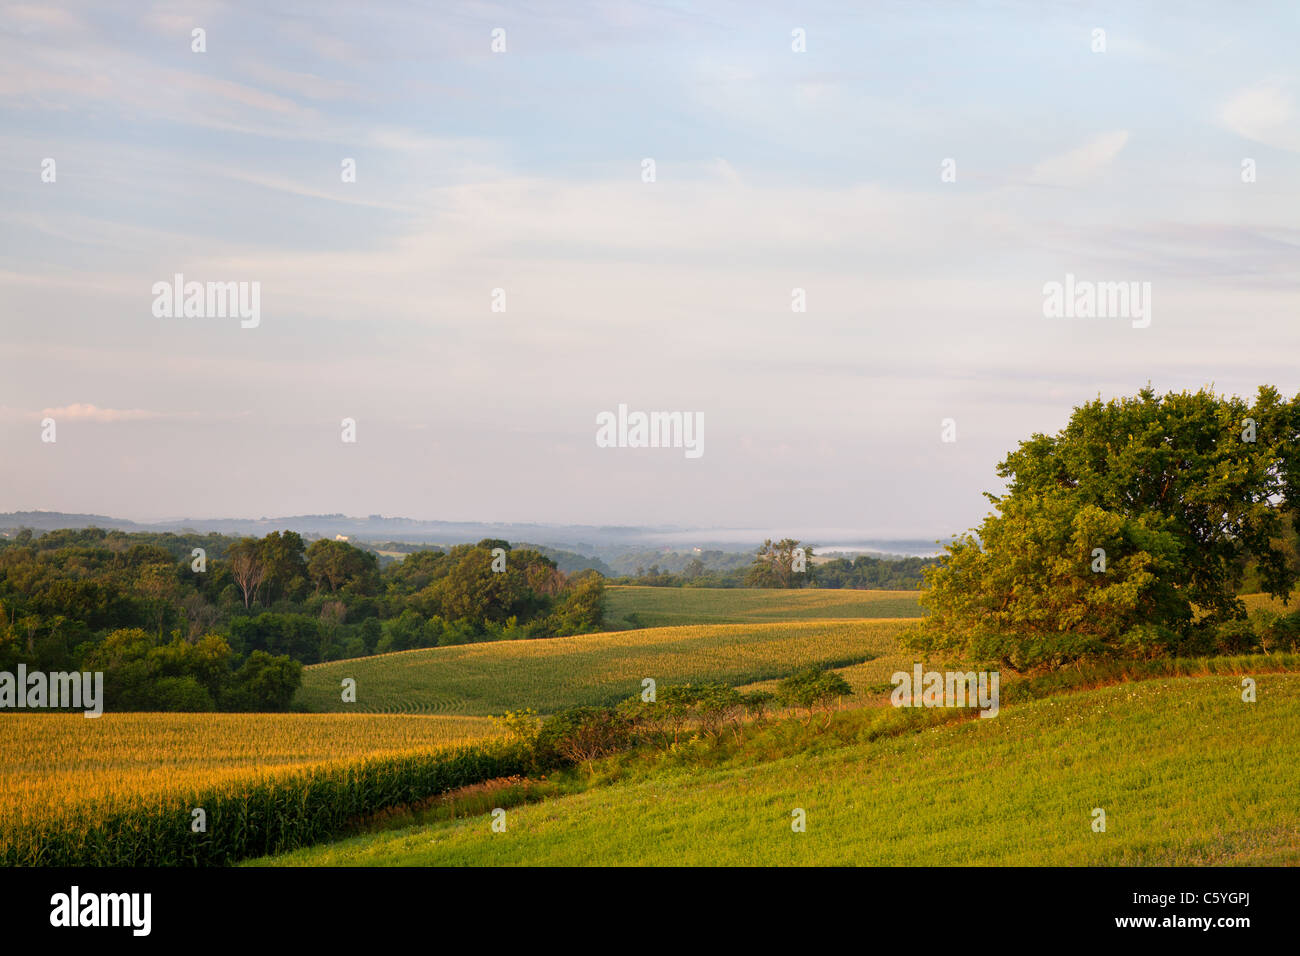 rural scenes along the Driftless Area Scenic Byway, County Road B25, Allamakee County, Iowa Stock Photo